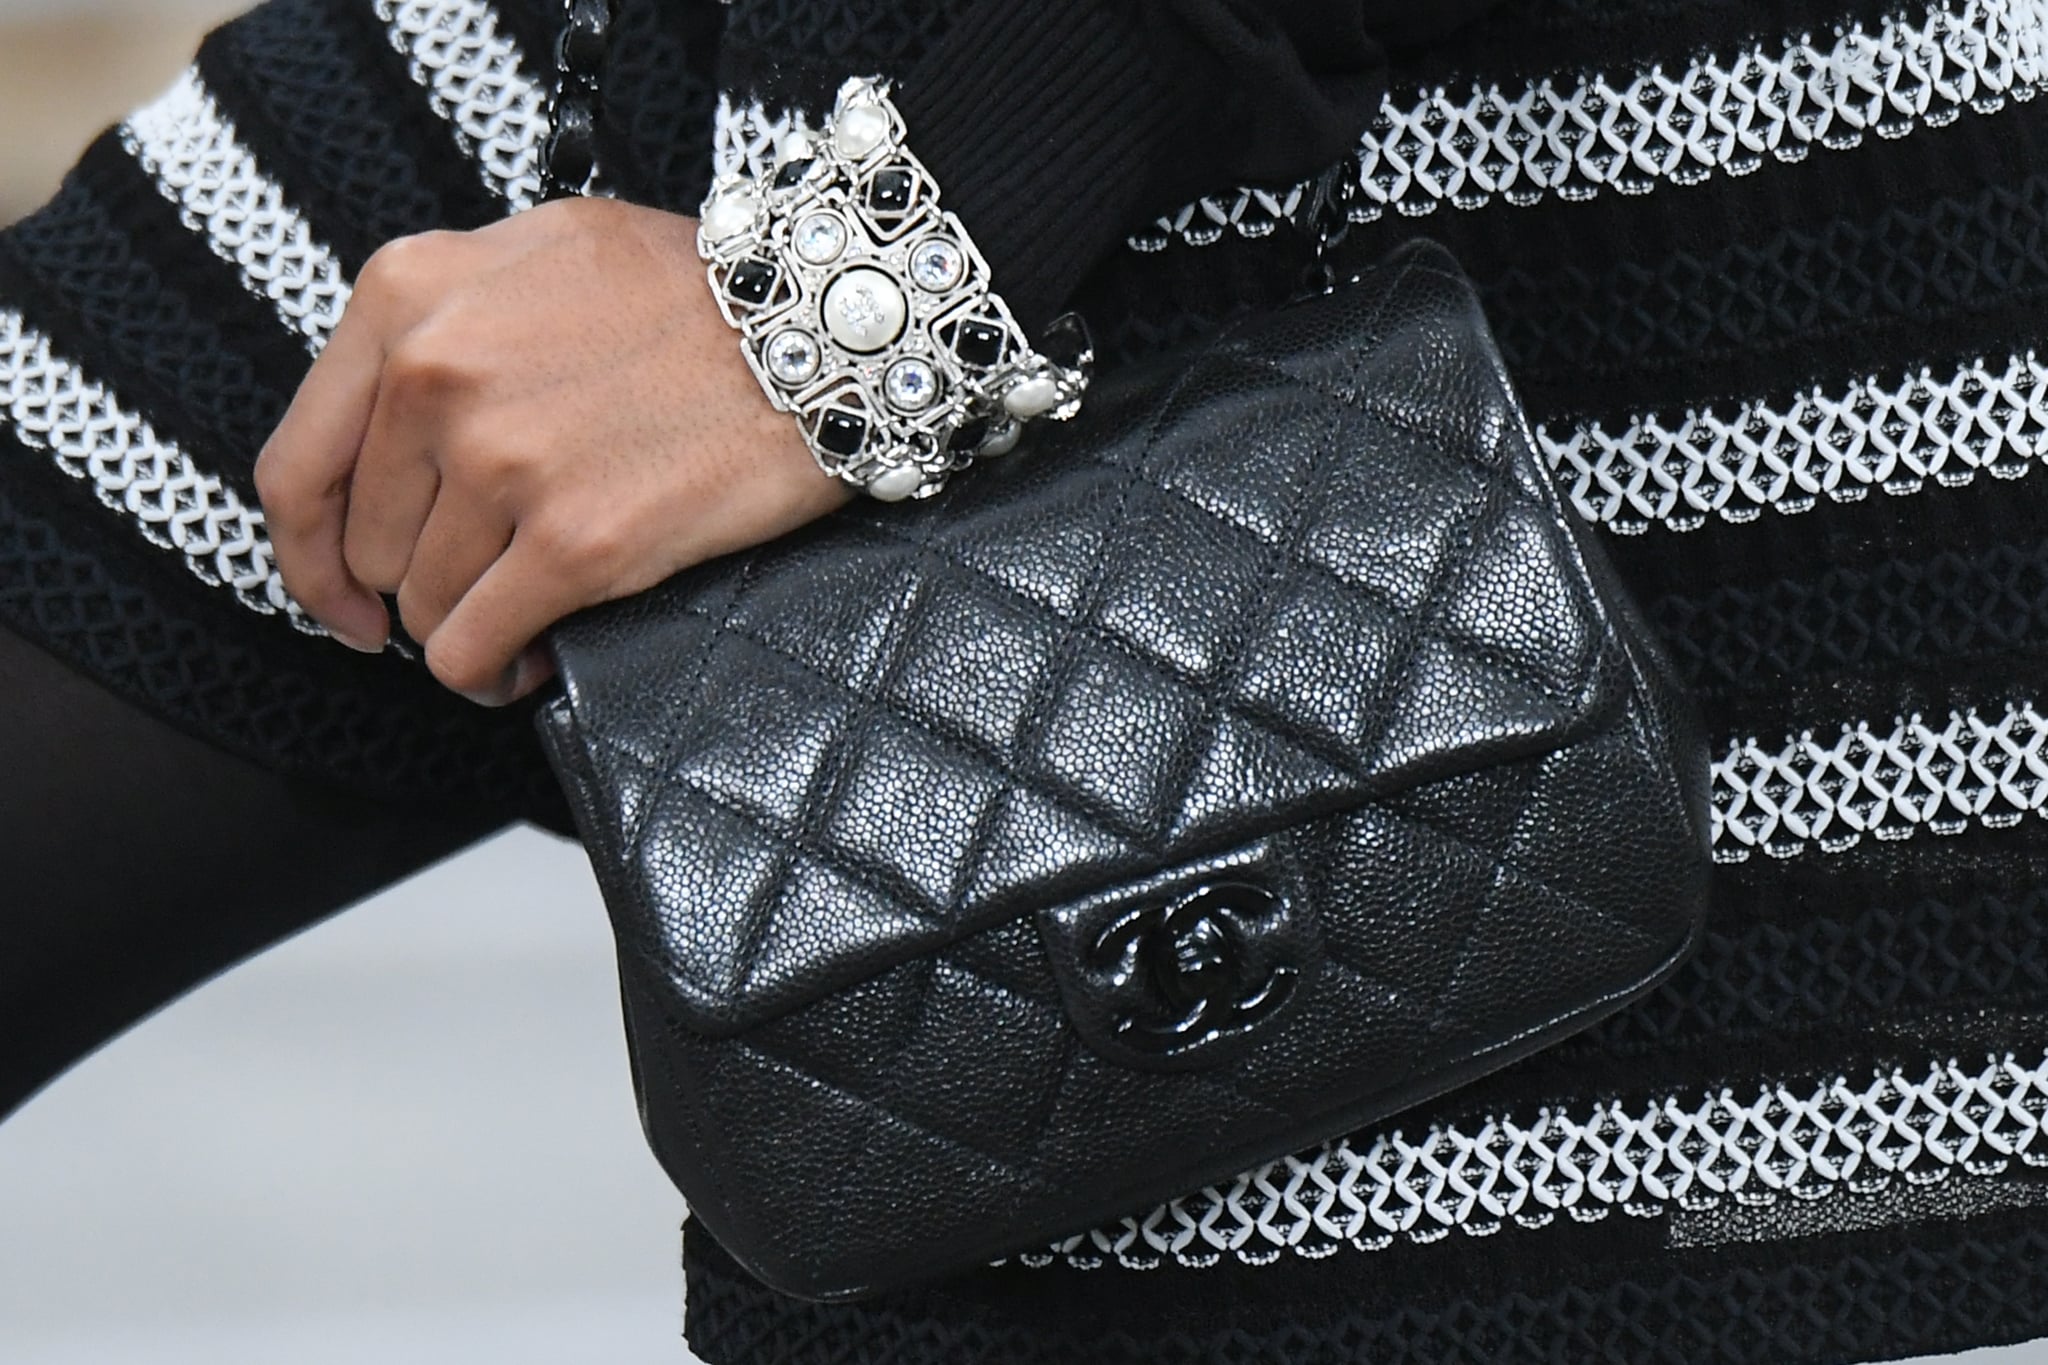 CHANEL SPRING SUMMER 2020 WOMEN'S COLLECTION DETAILS